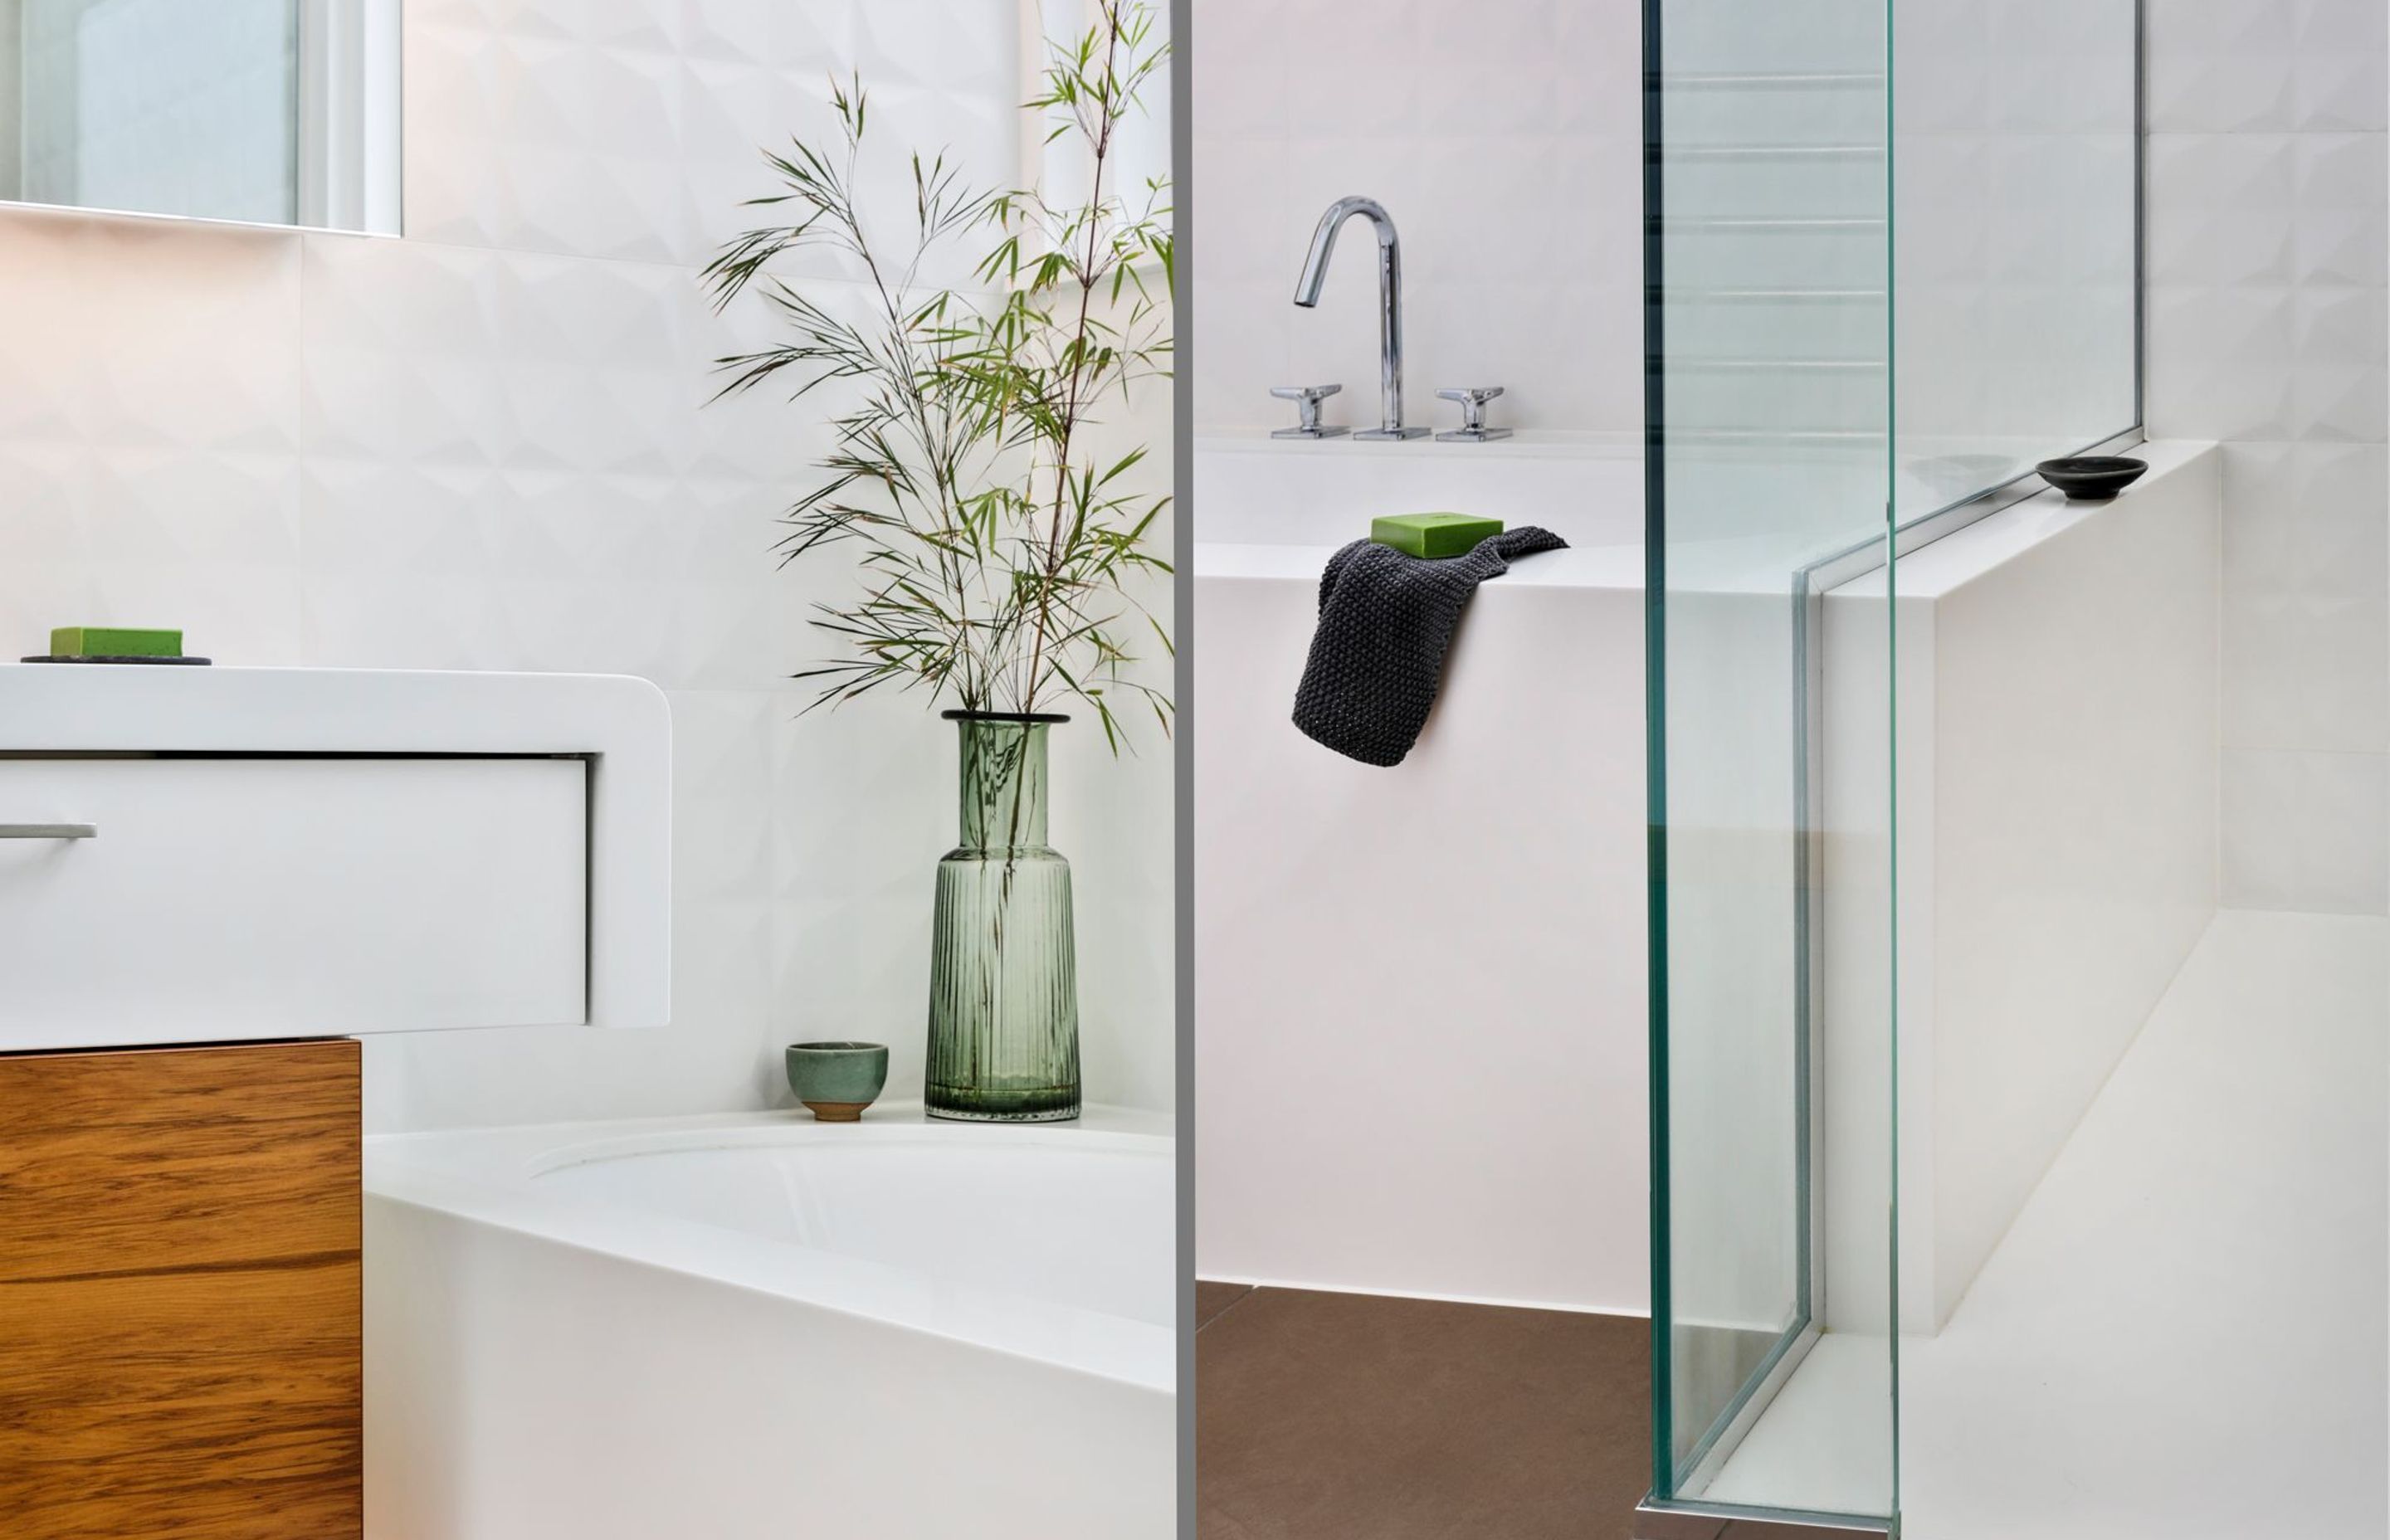 Corian features on the floating vanity top which appears to fall off into the bath surround yet is intentionally separate to create tension. This bath mould subsequently flows seamlessly through into the shower space creating a useful ledge within.